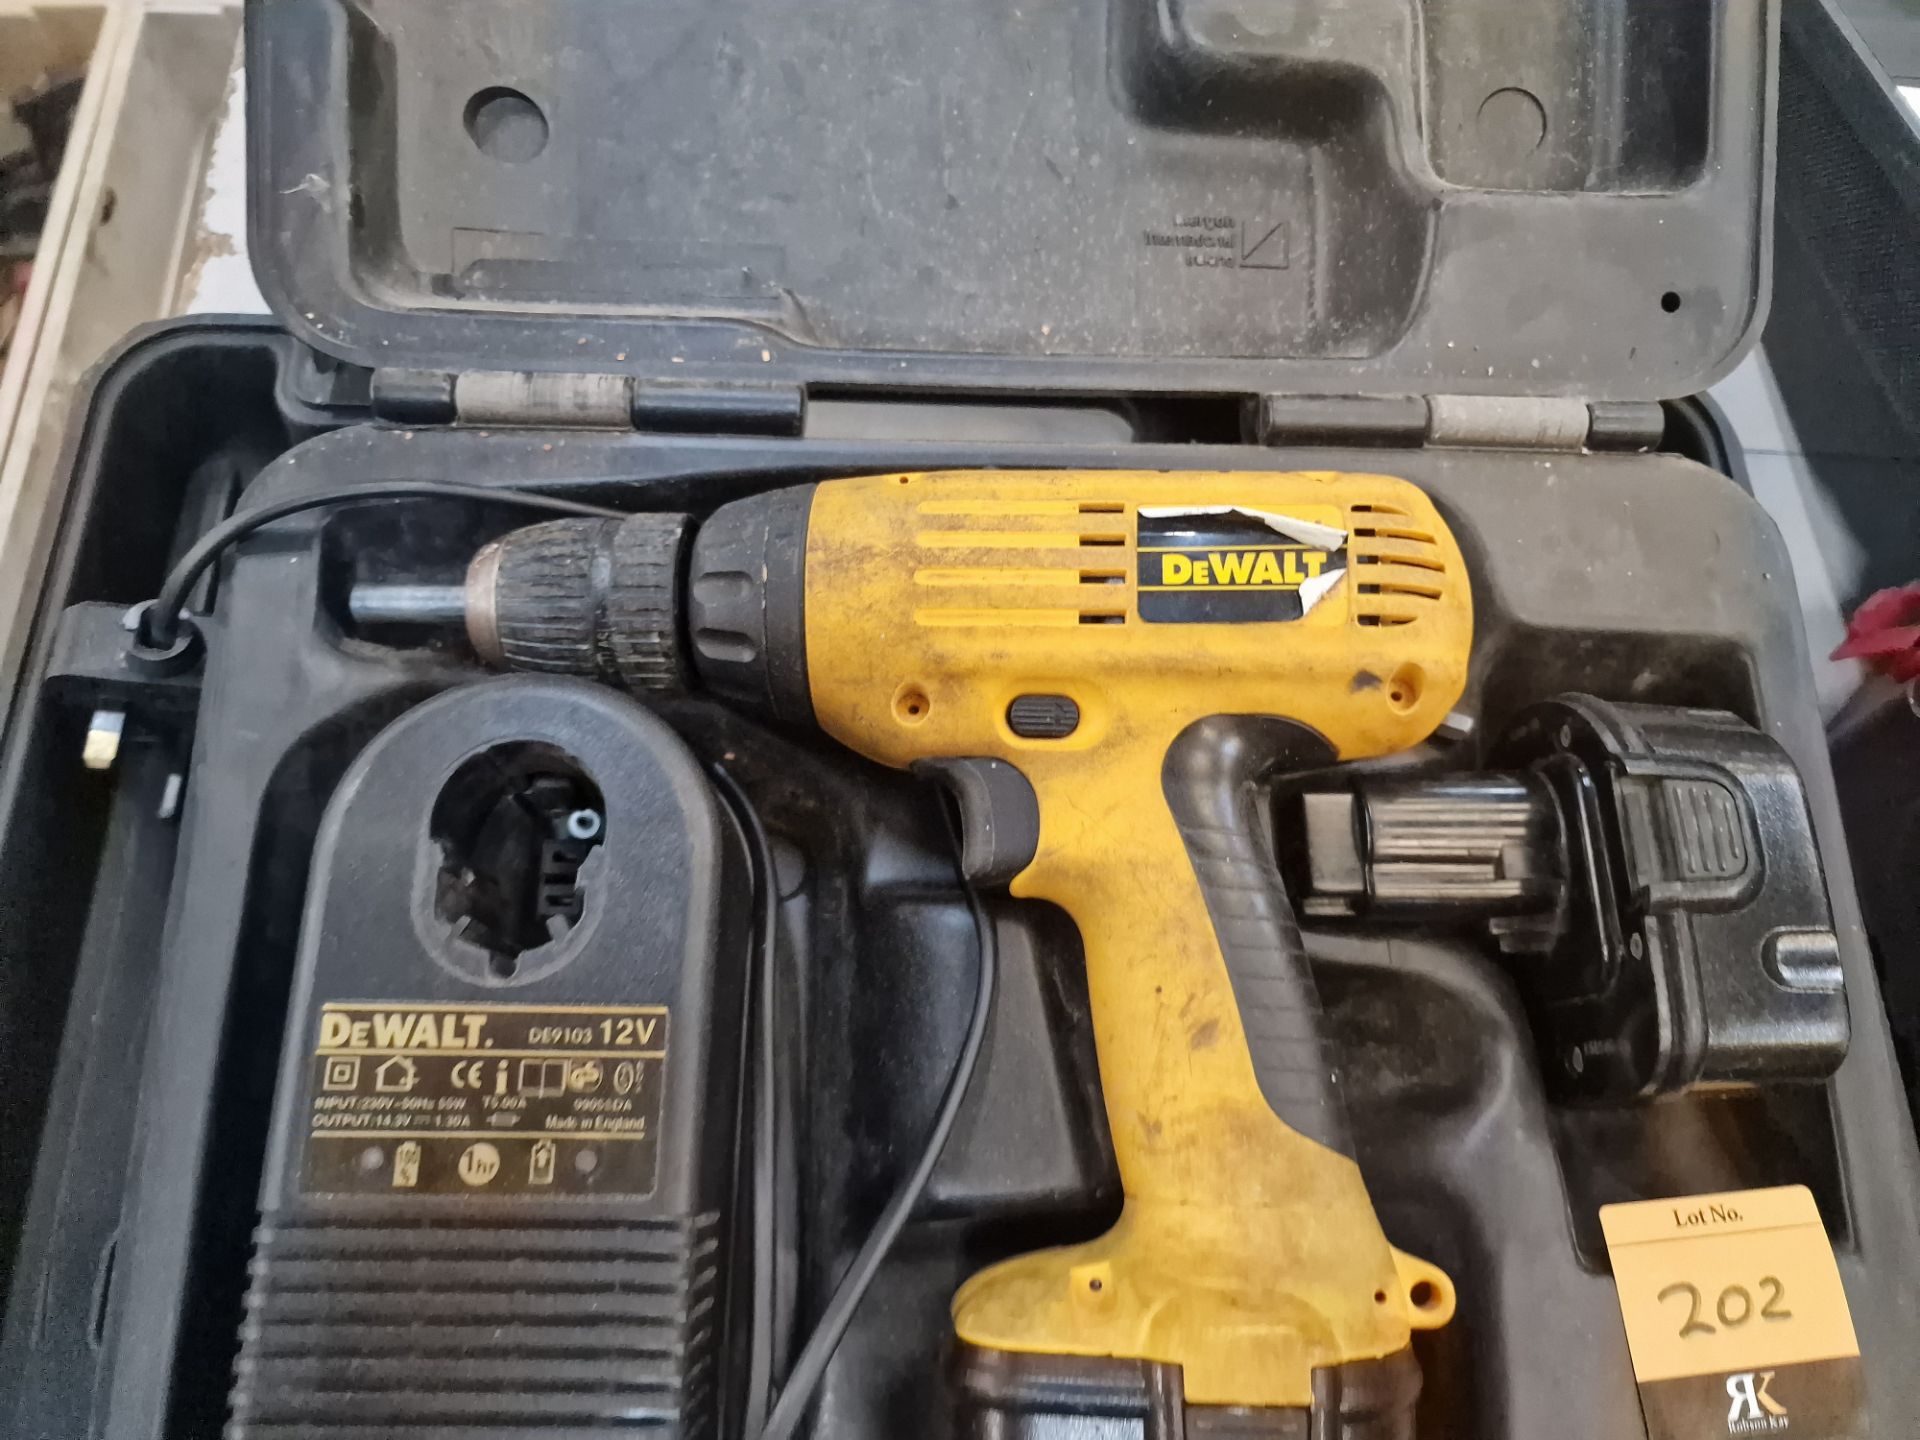 Dewalt cordless drill including 2 off batteries, 1 charger and 1 case - Image 4 of 4